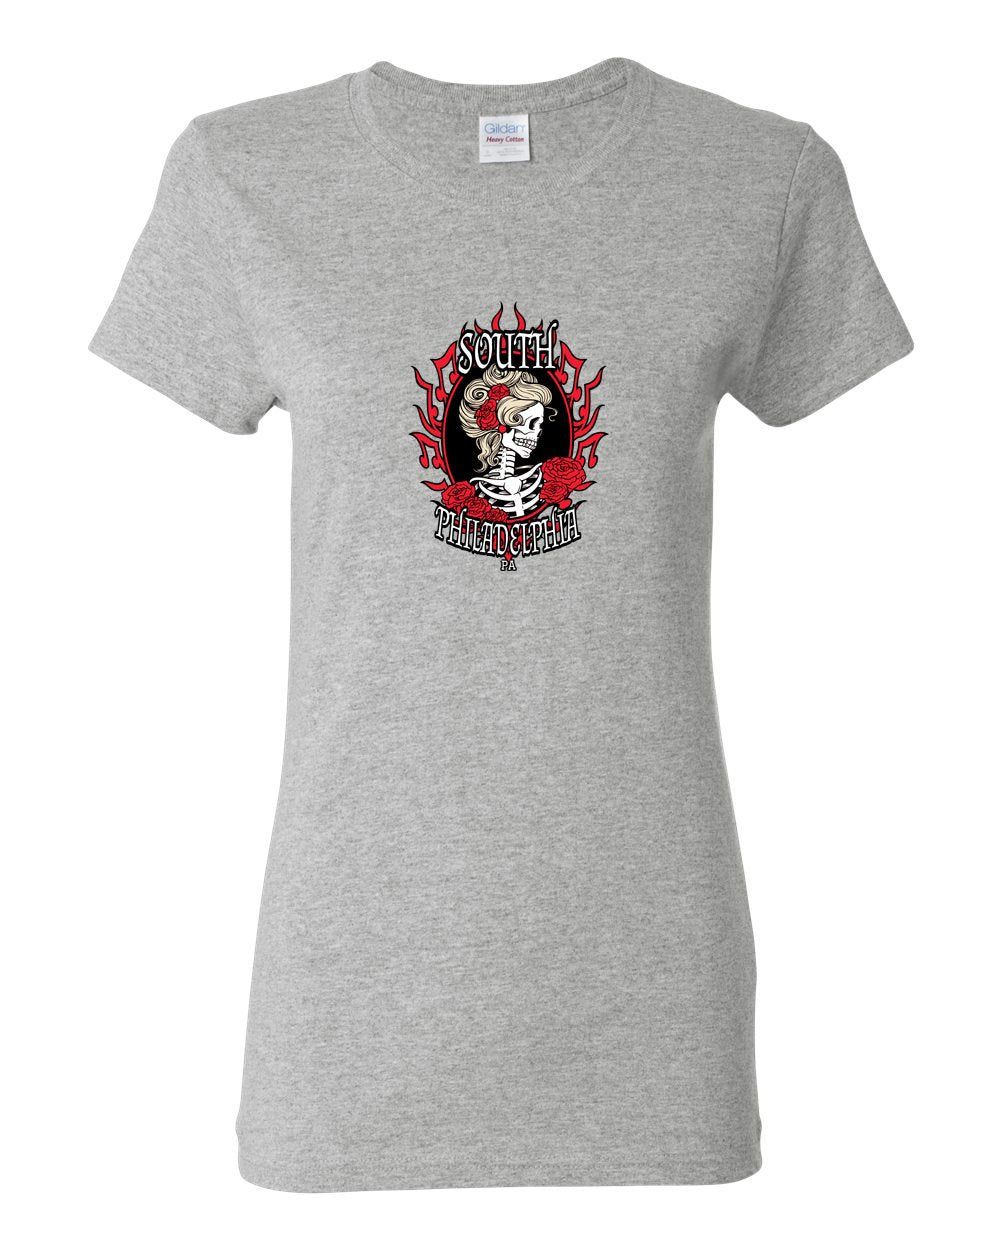 South Philly Dead LADIES Missy-Fit T-Shirt